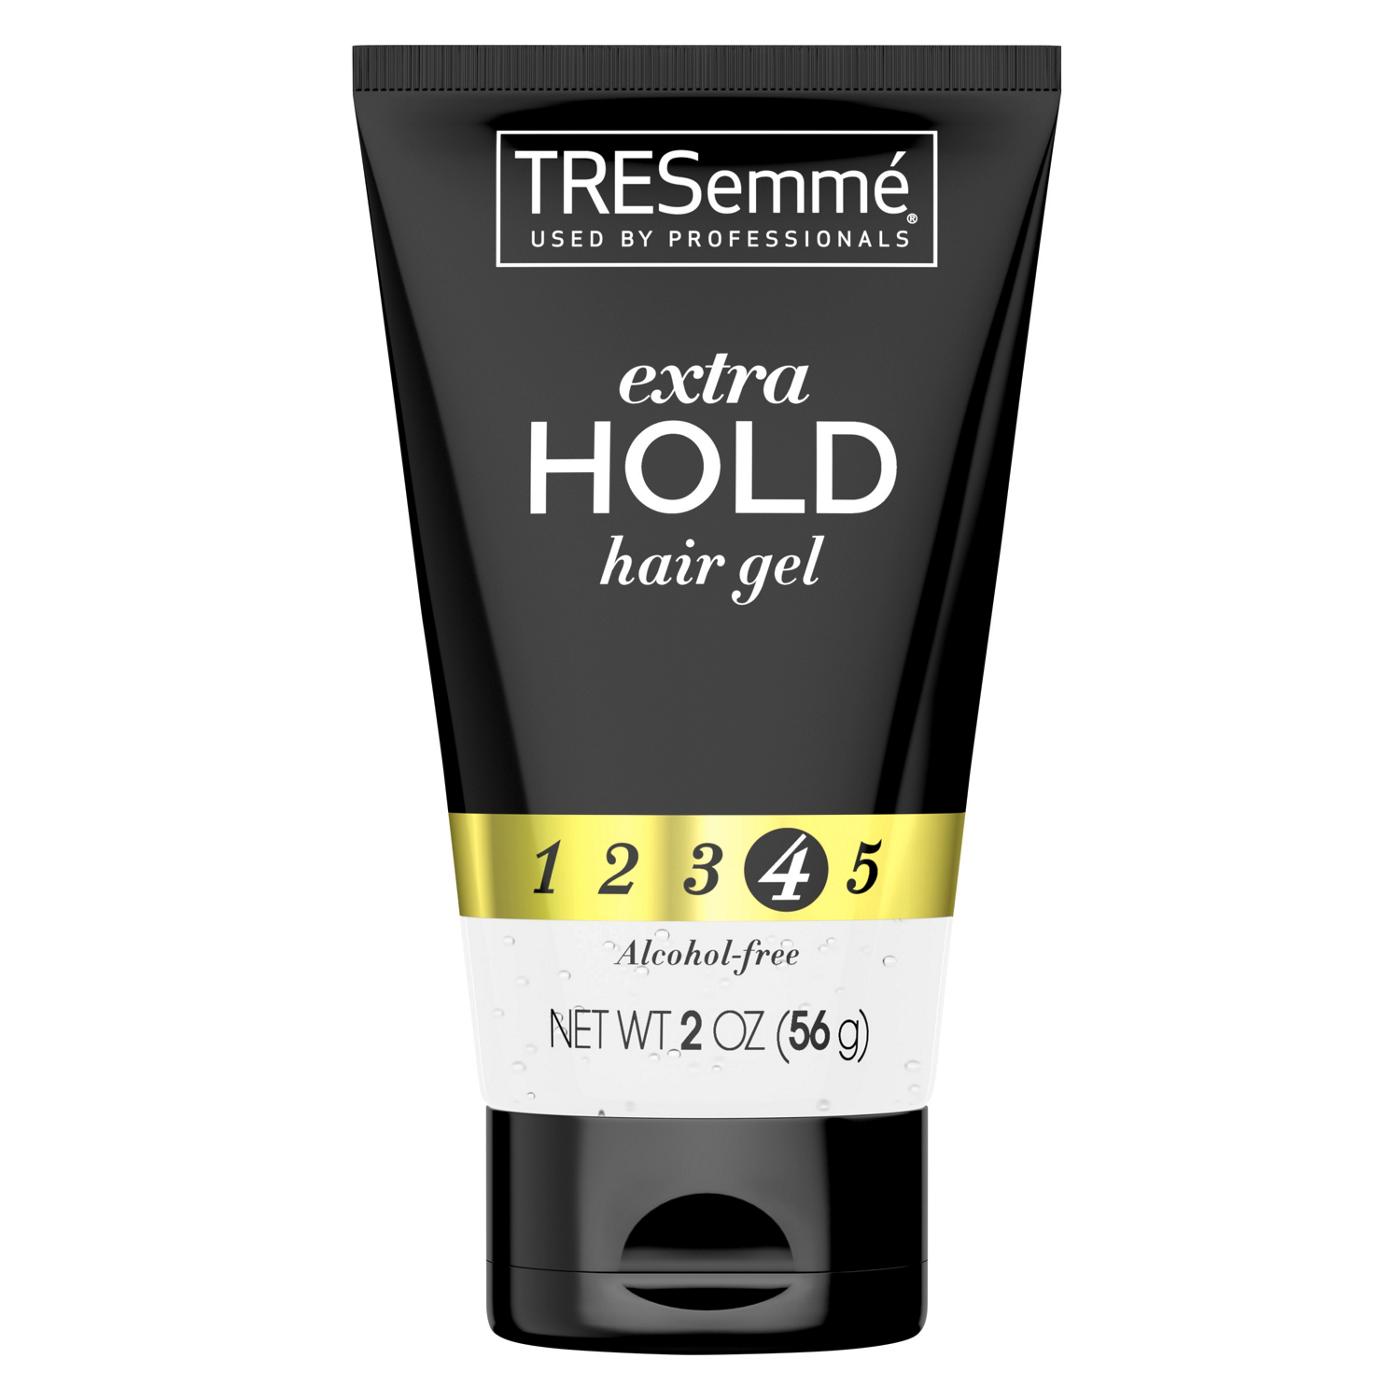 TRESemmé Travel Size TRES Gel Extra Hold Firm Control Hair Gel; image 1 of 2